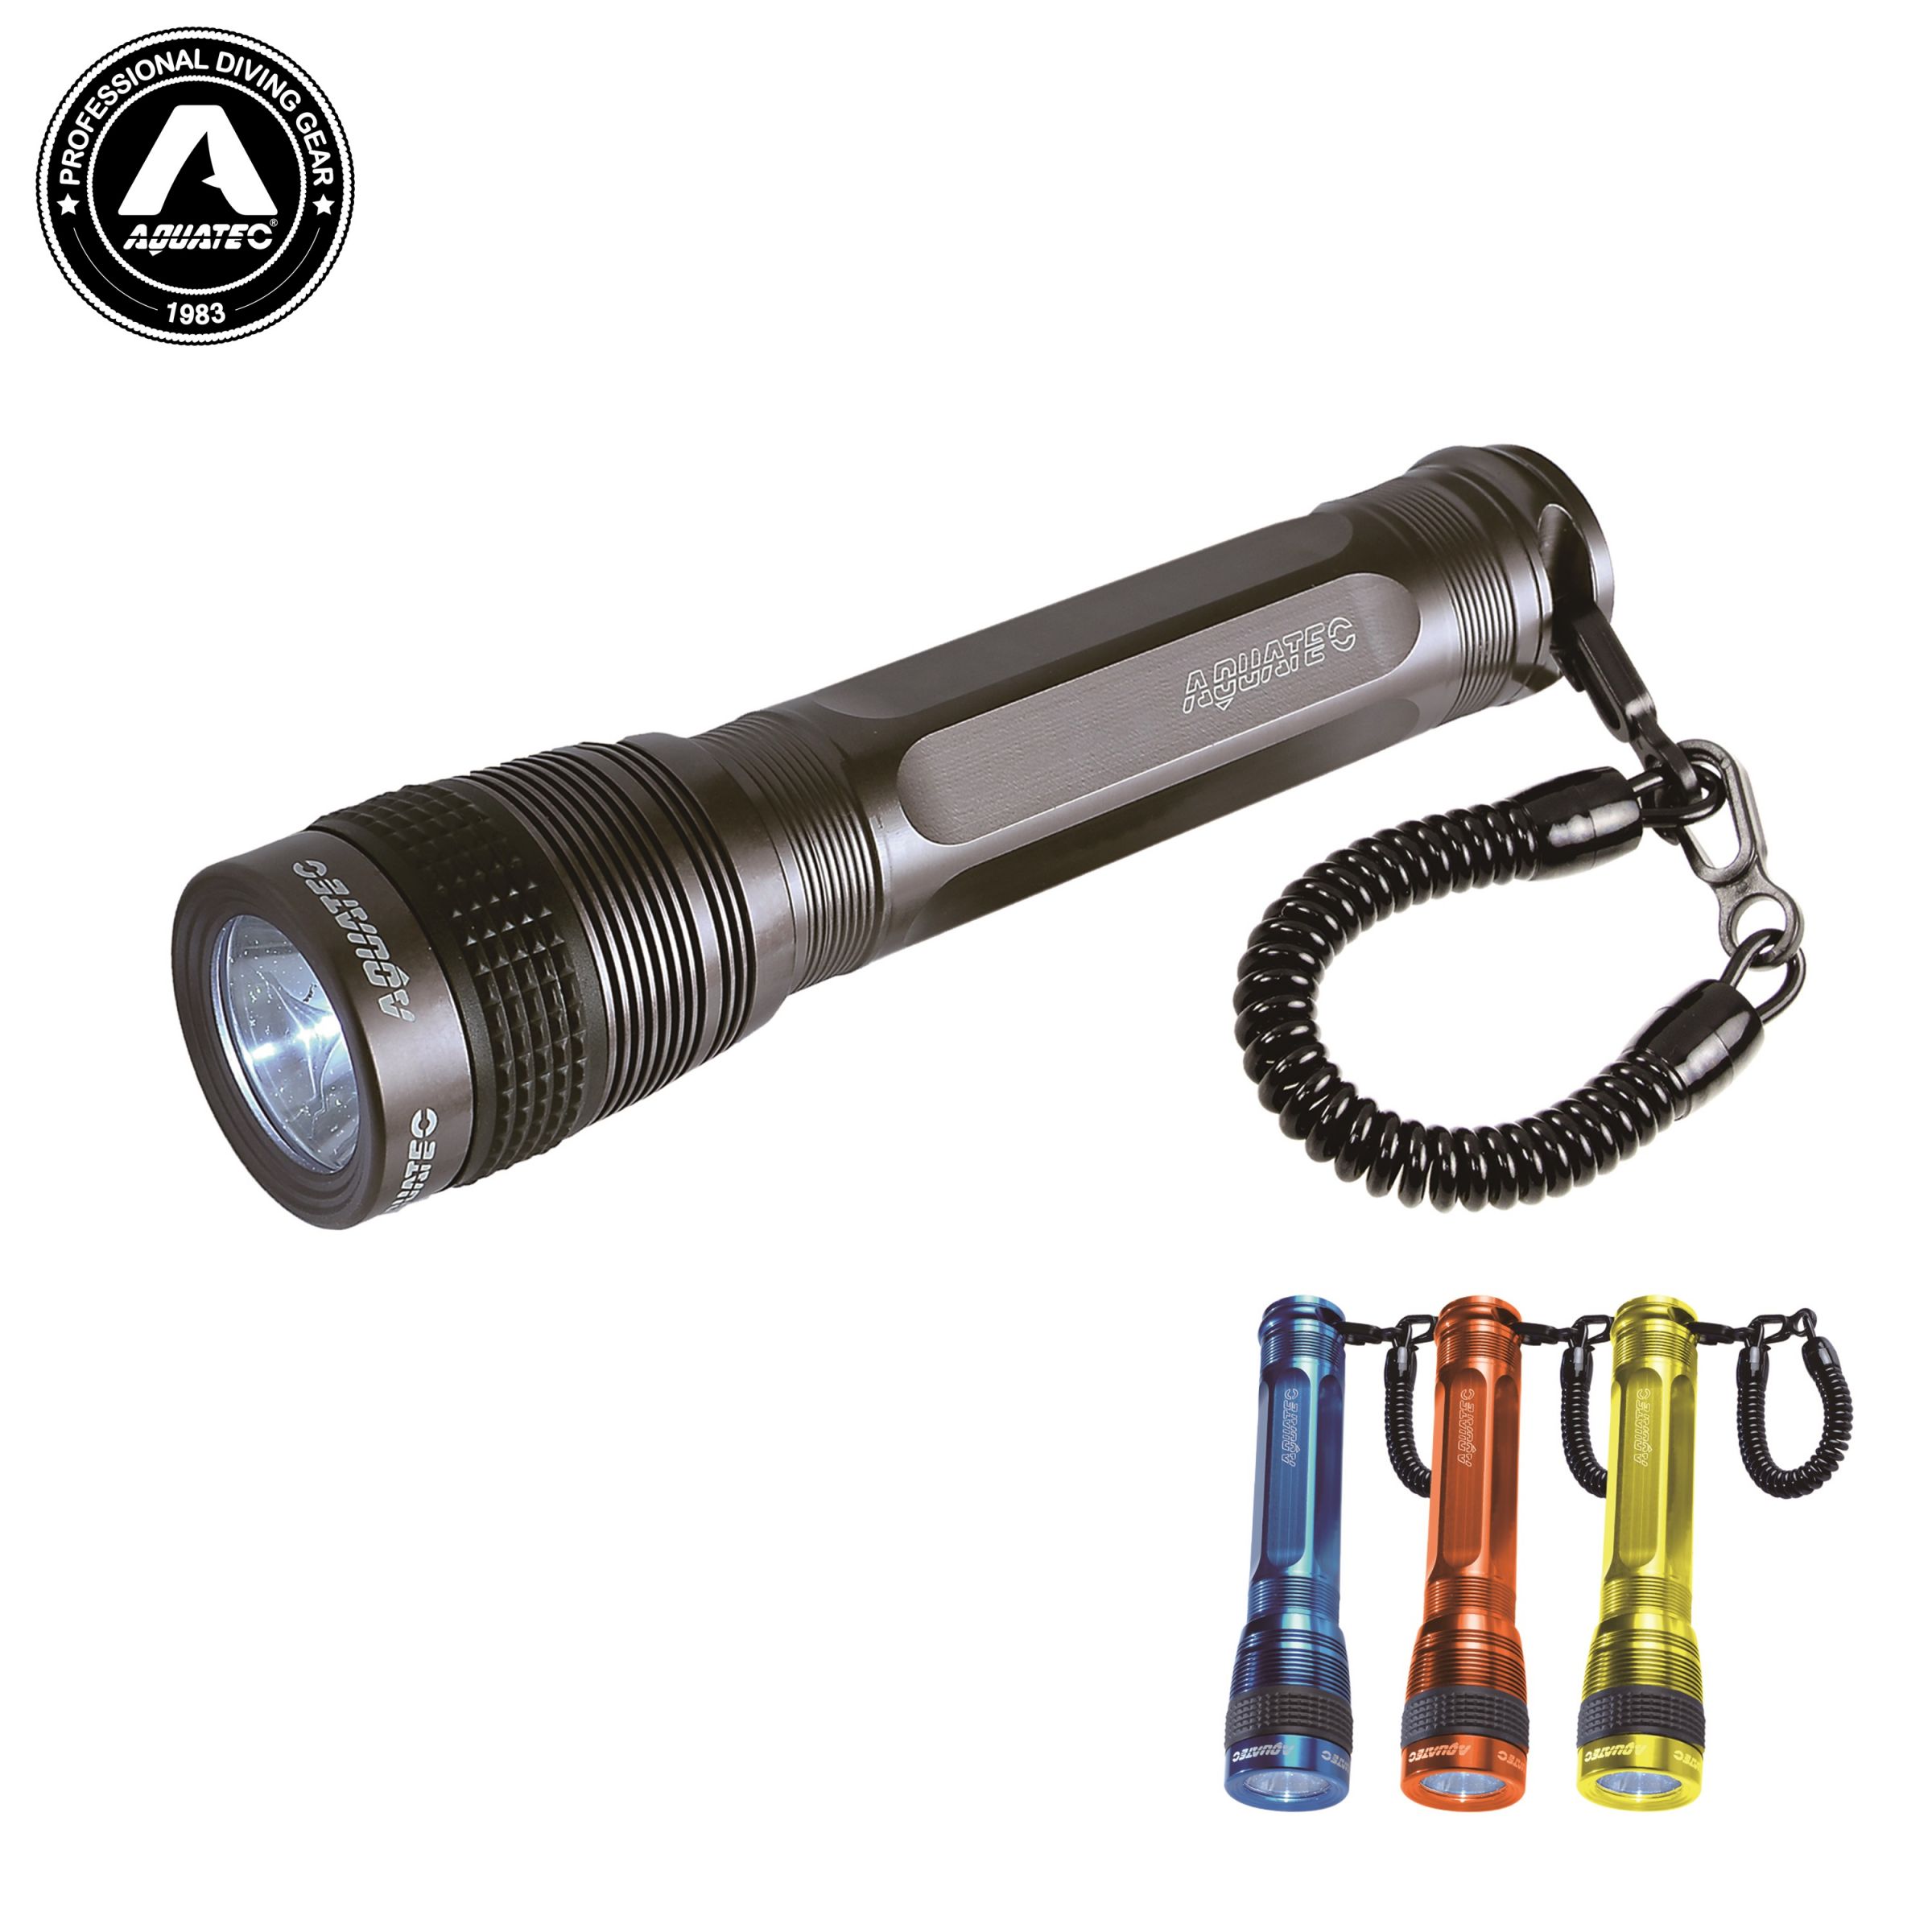 DaoAG-Outdoor Underwater Diving Led Flashlight Waterproof 70M Scuba Diving Flashlight Underwater Torch 3200LM Night Dive Torch Light for Diving Cycling Climbing 